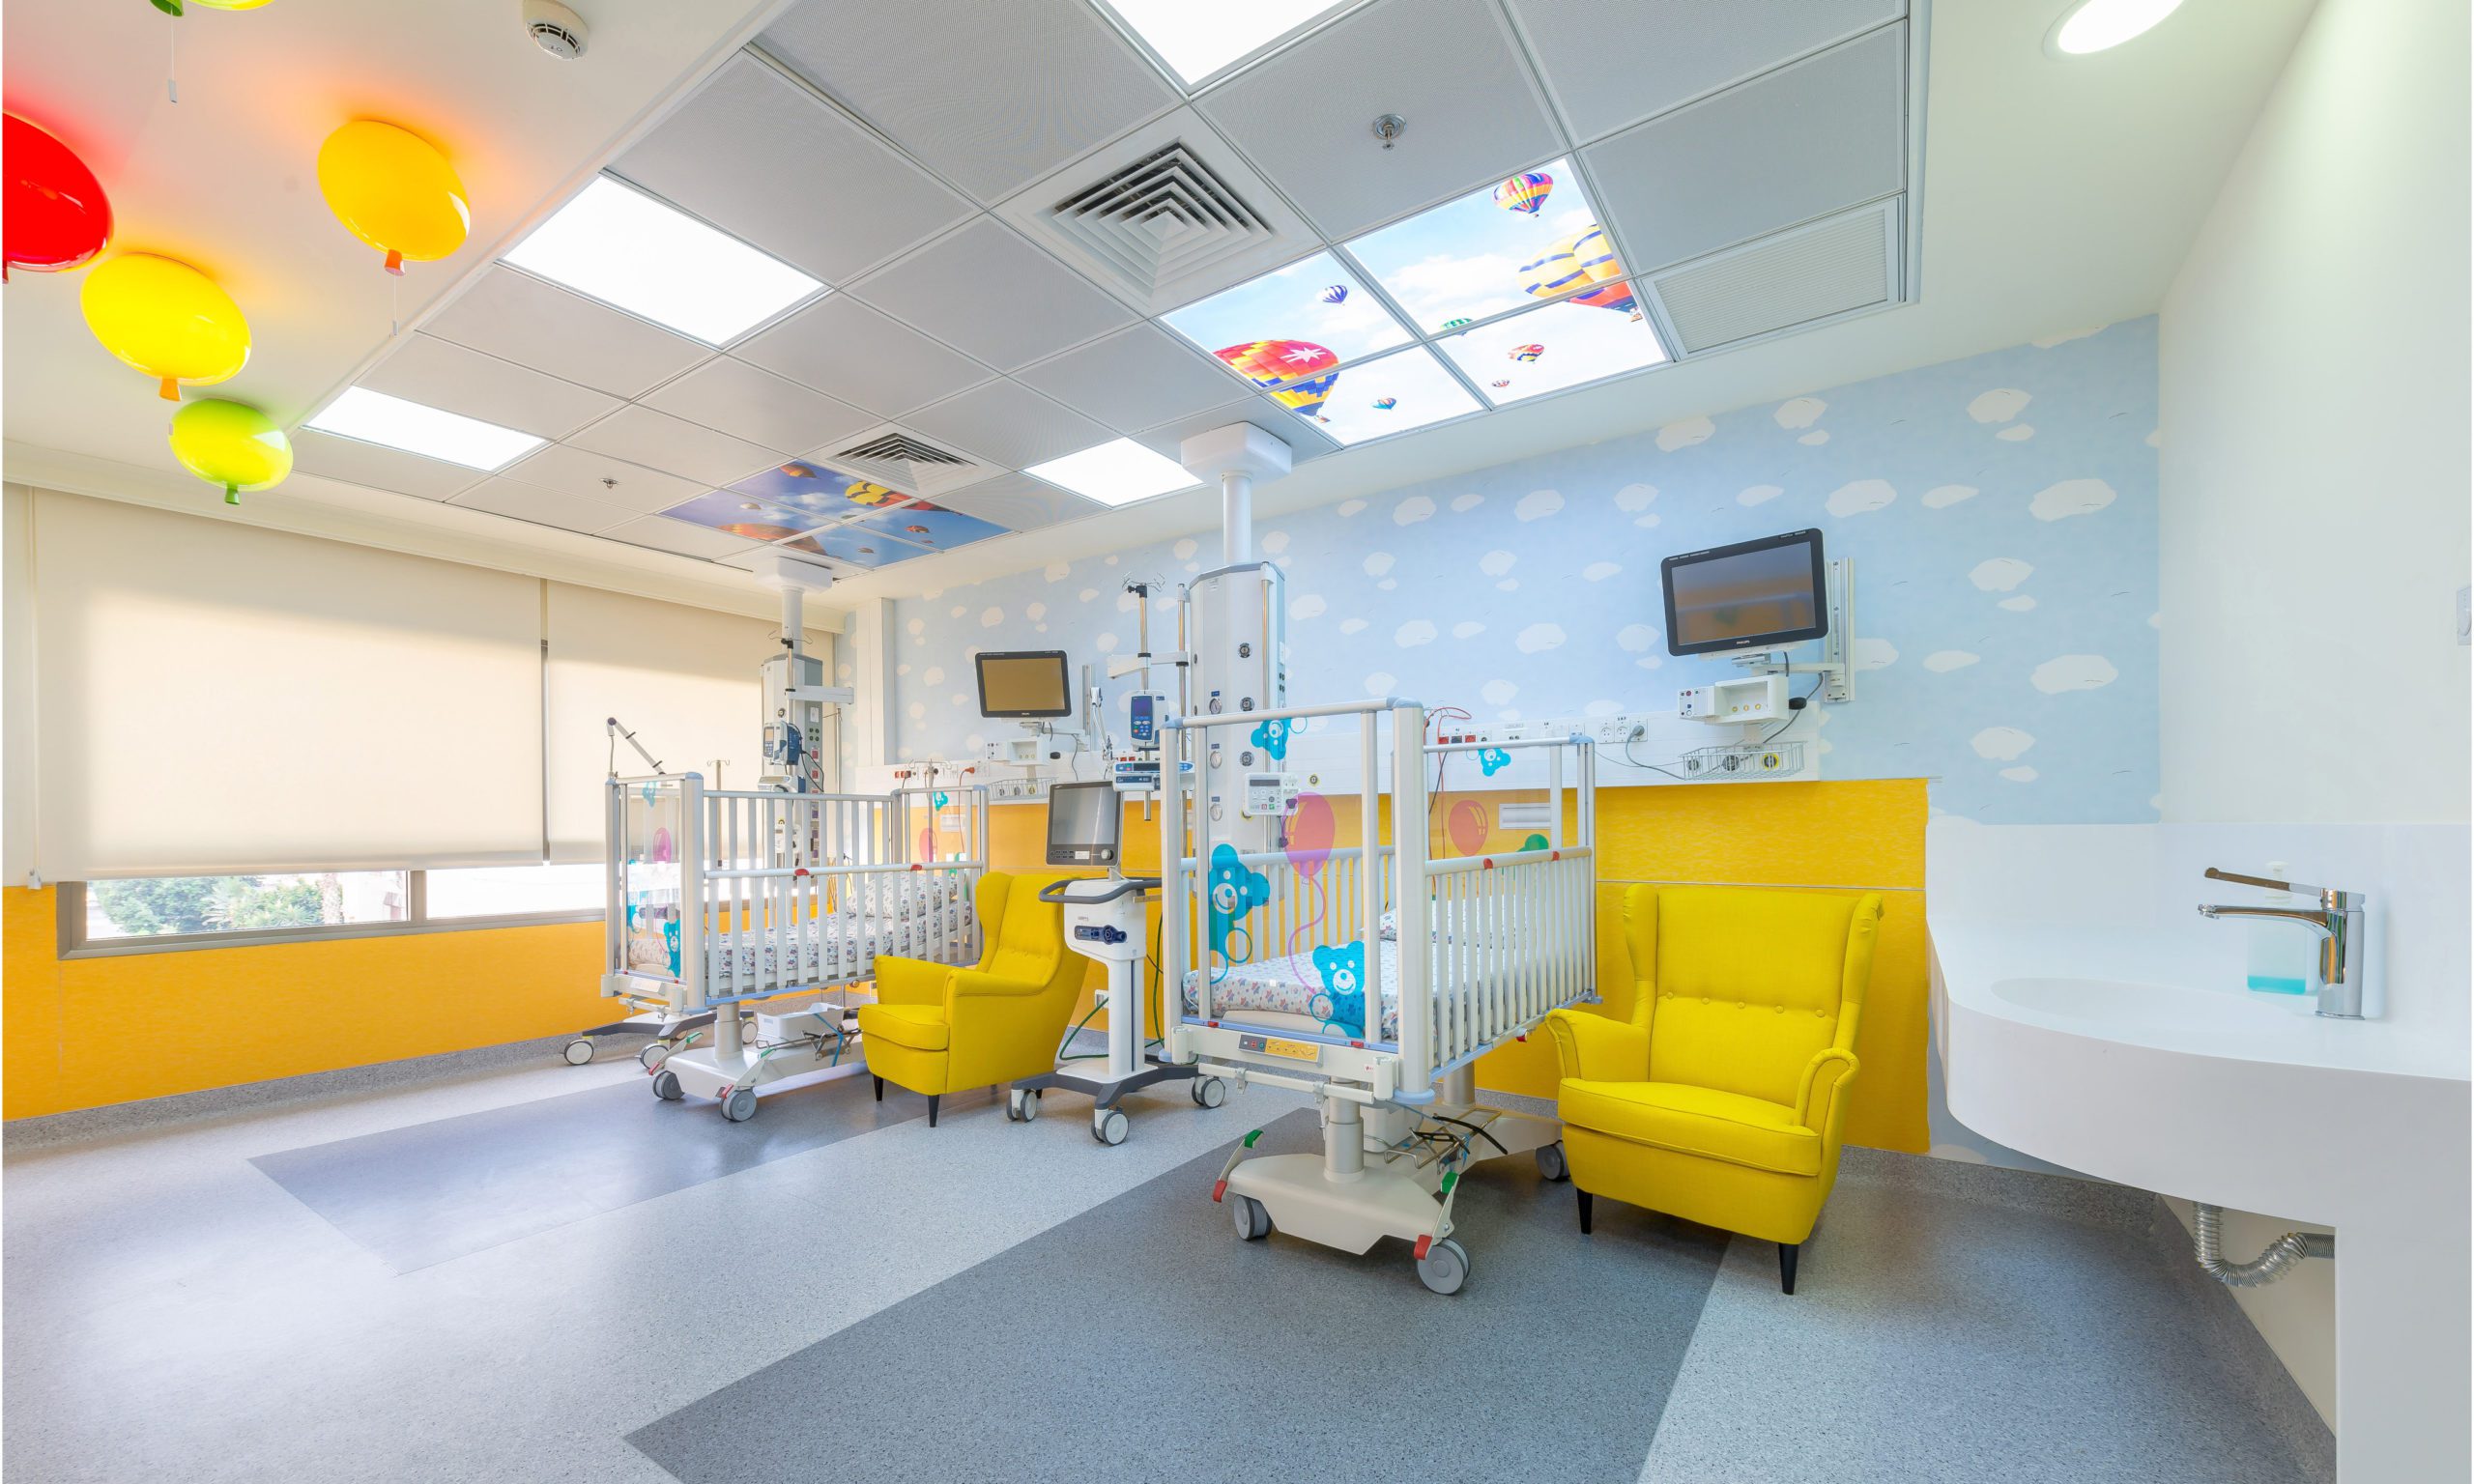 Beds of New PICU